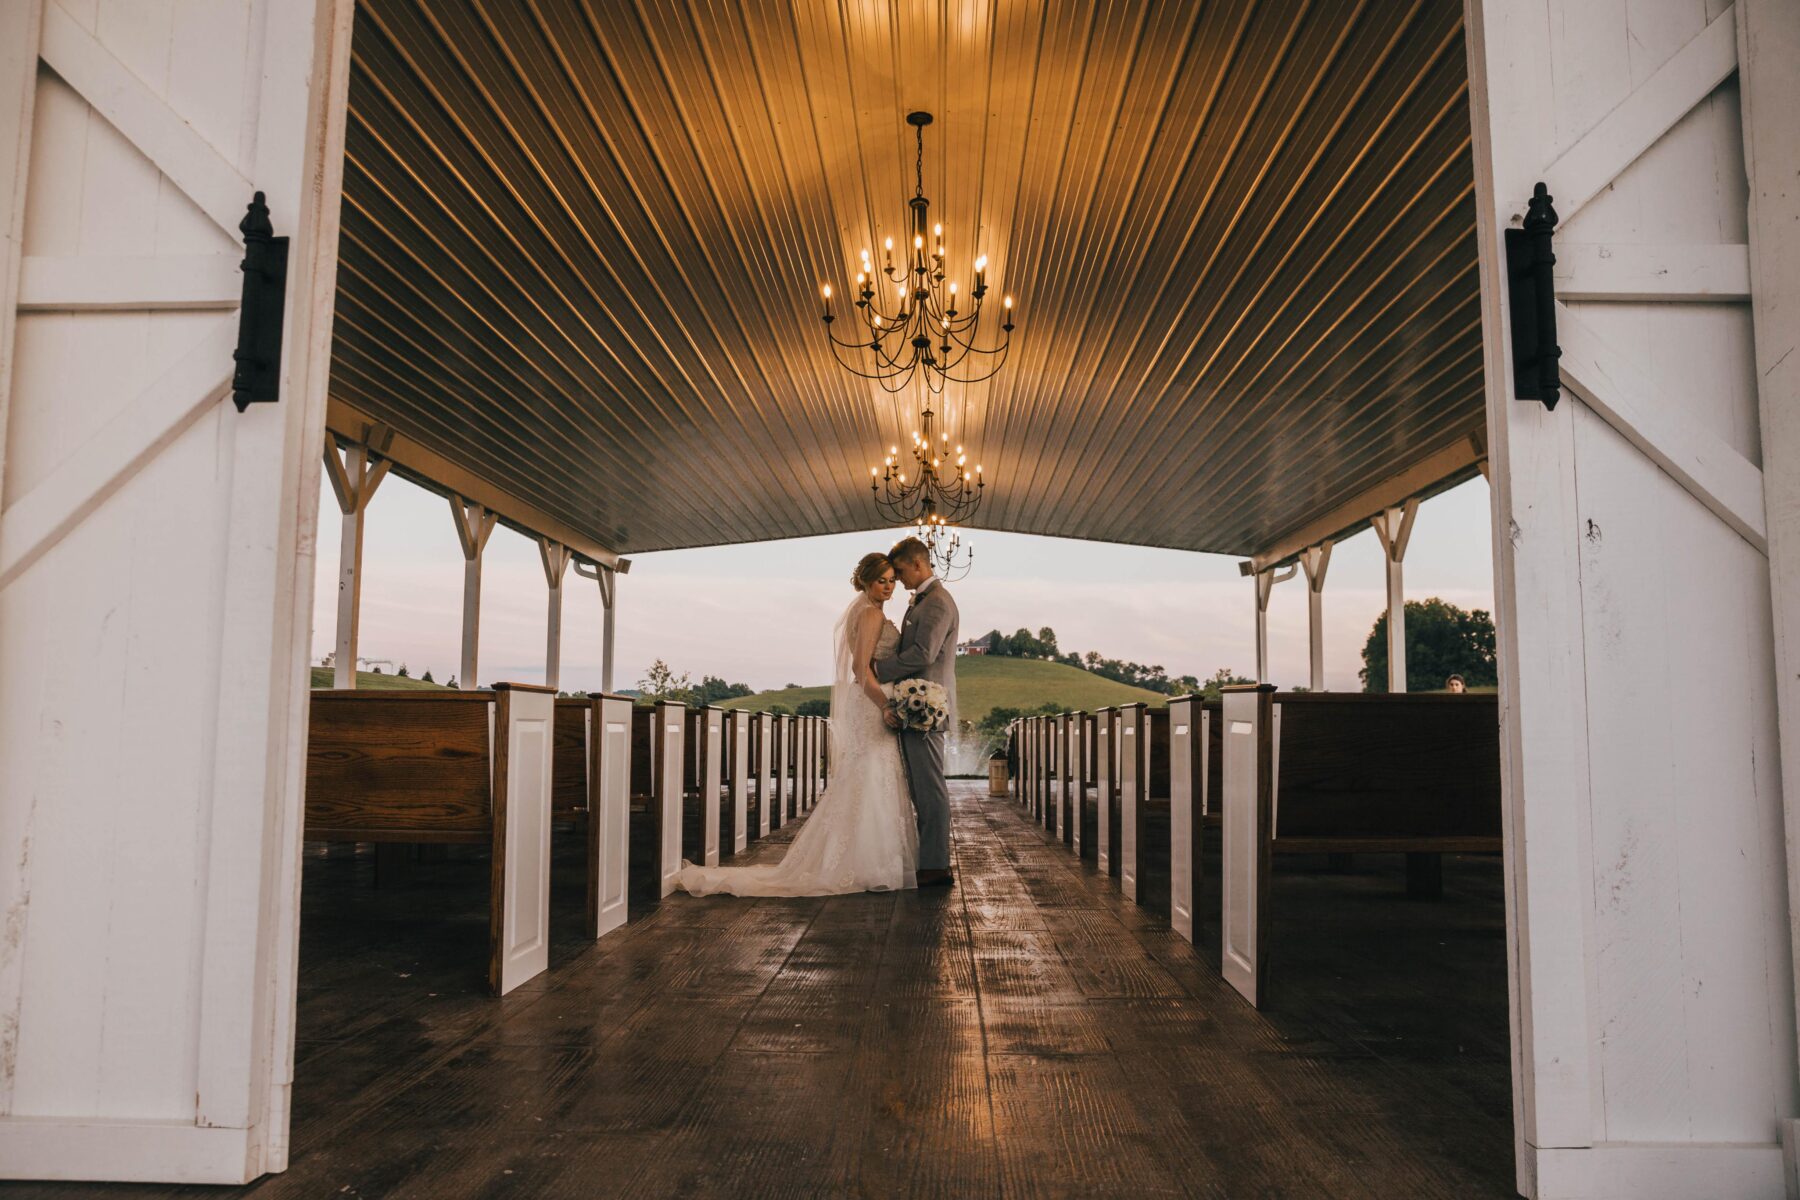 White Dove Barn Wedding by Grace Upon Grace Photography featured on Nashville Bride Guide